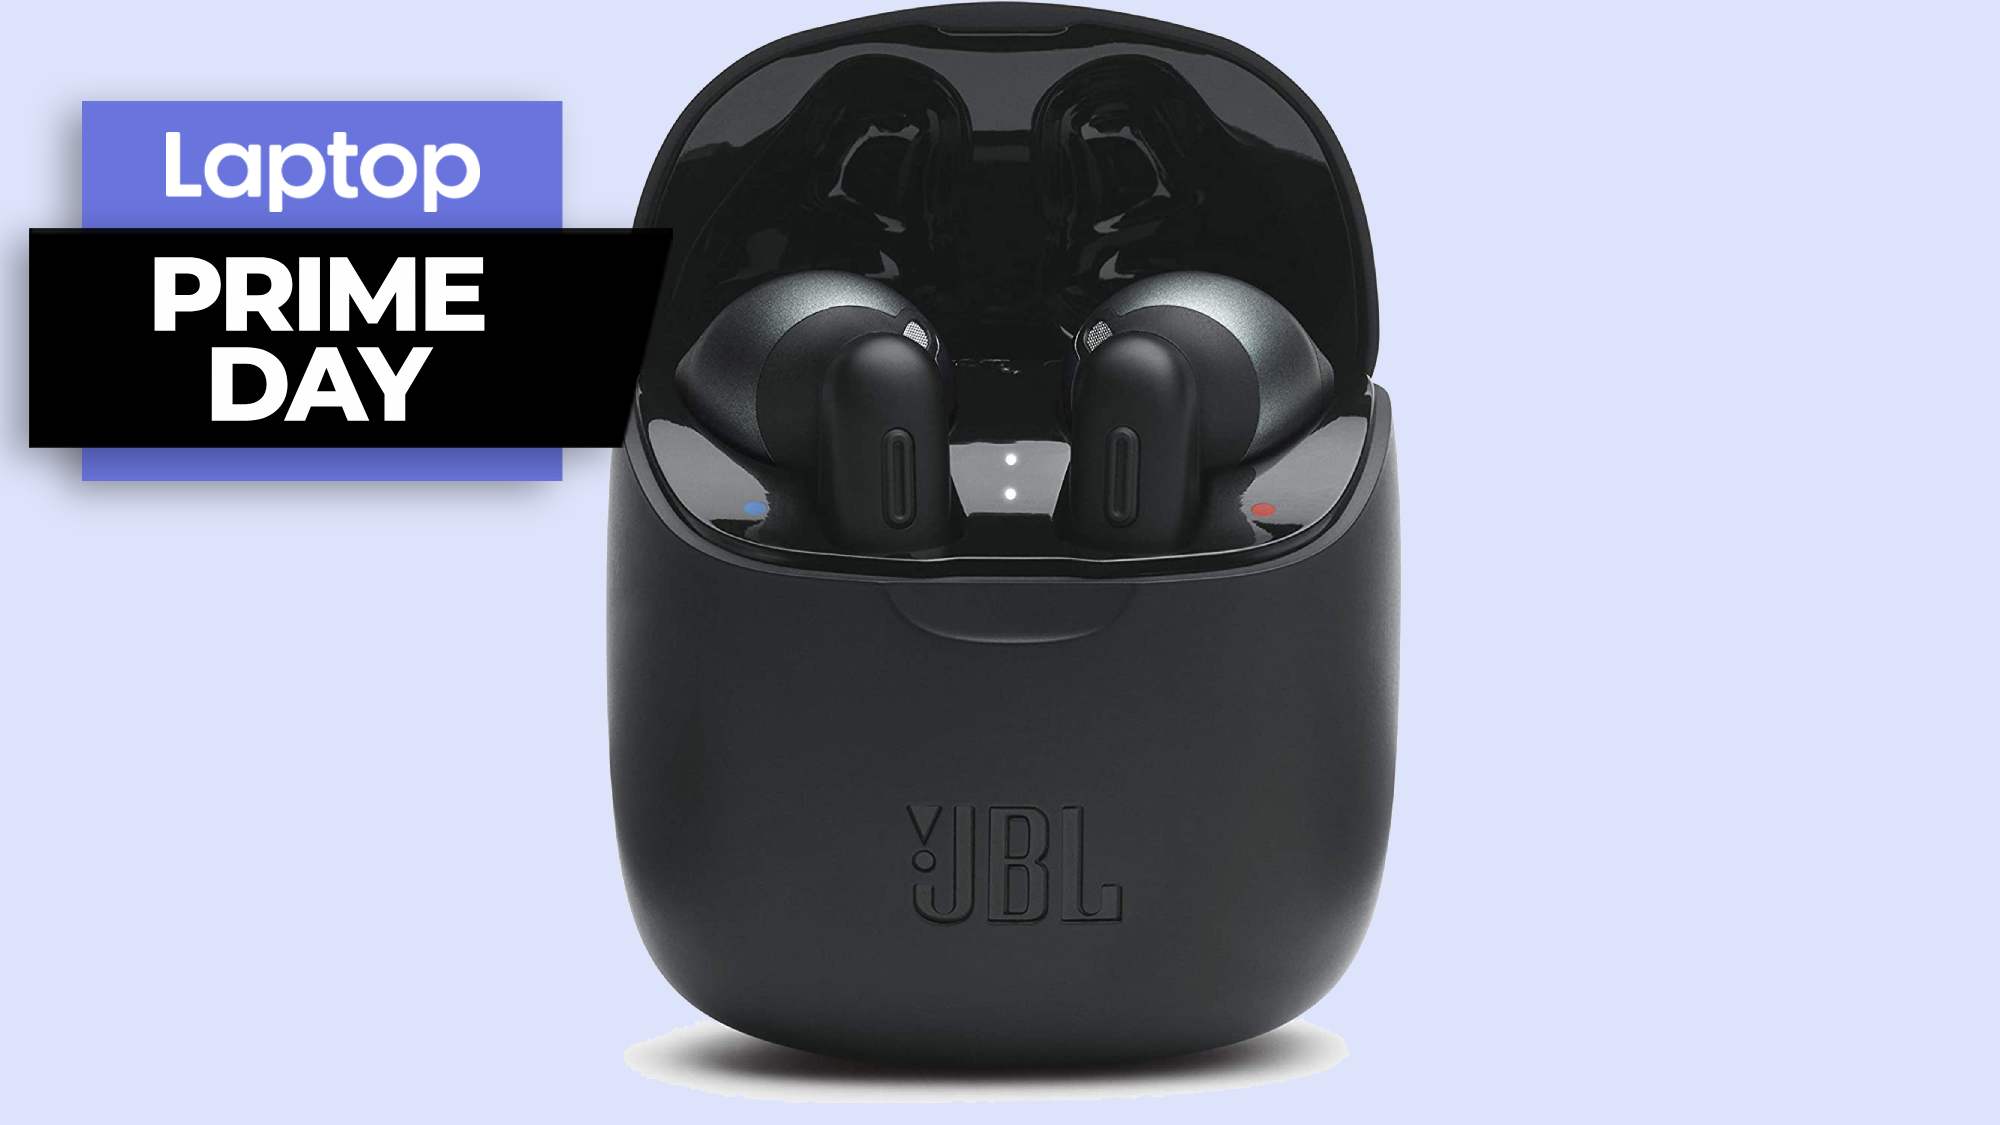 hul Bane Vuggeviser Forget AirPods! JBL wireless earbuds drop to $50 in October Prime Day deal  | Laptop Mag